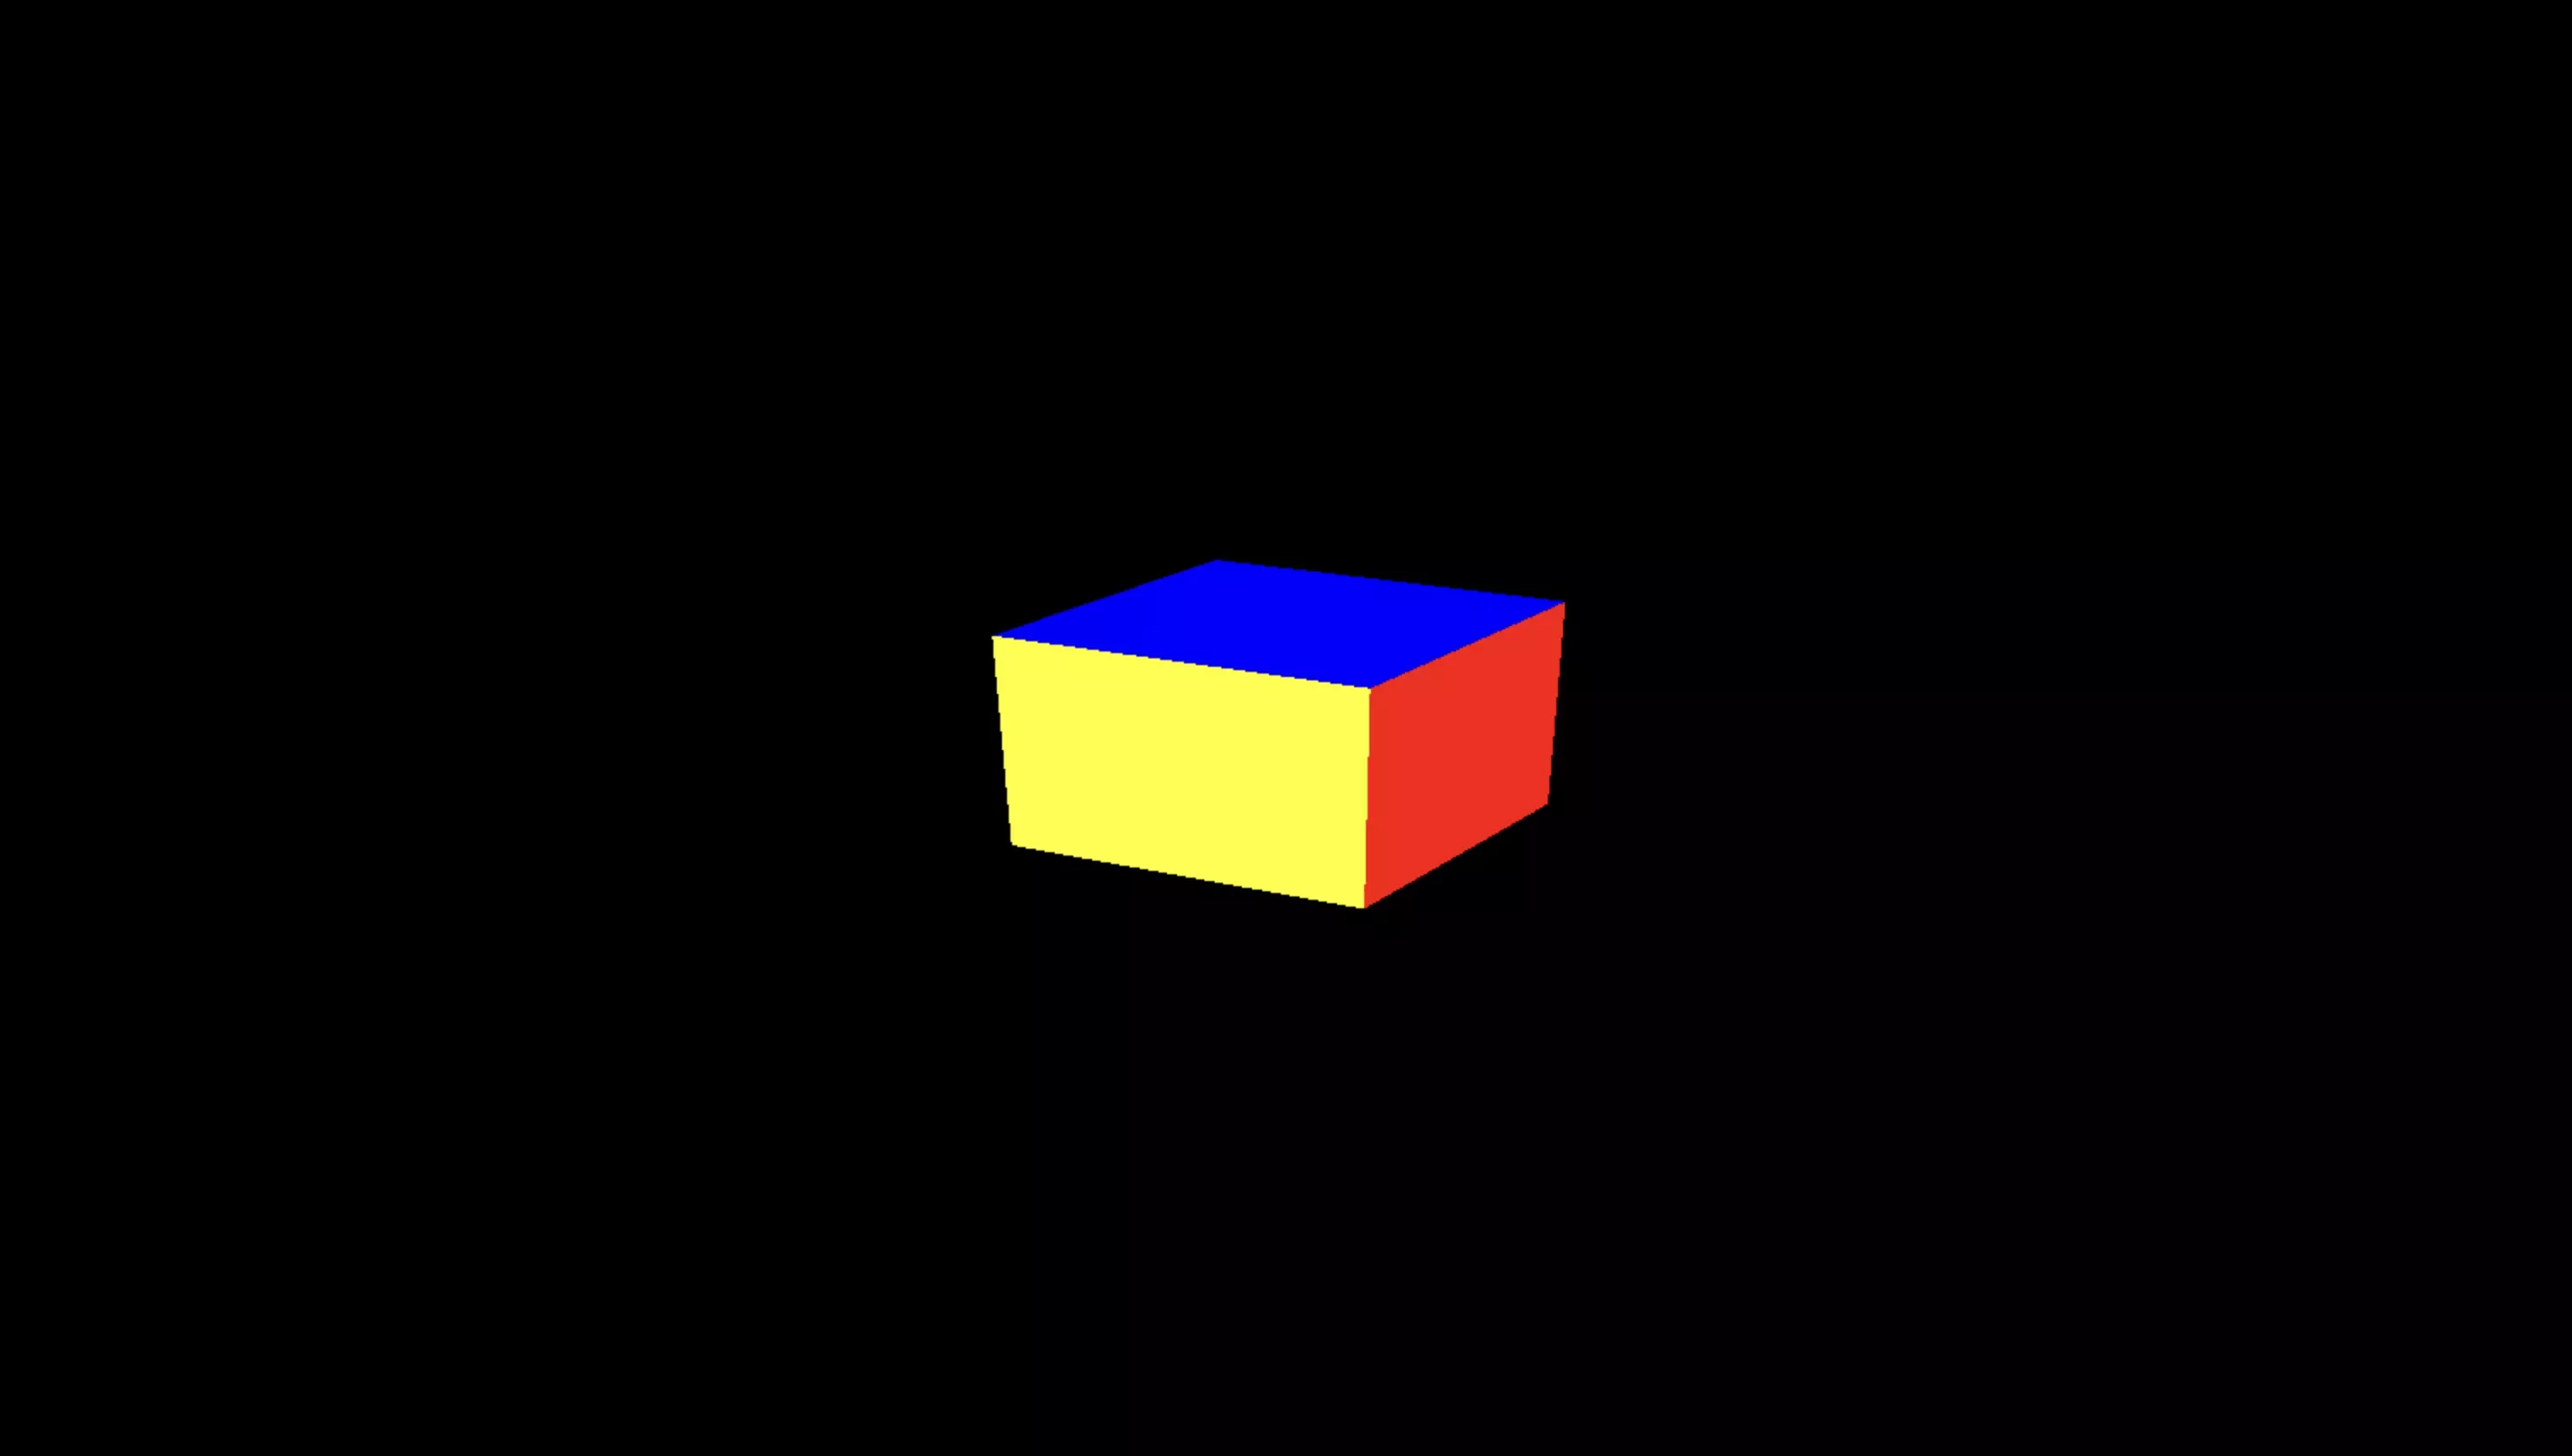 A screenshot of Chrome showing a cube with colored faces that match the colors we set for the vertices in this tutorial.